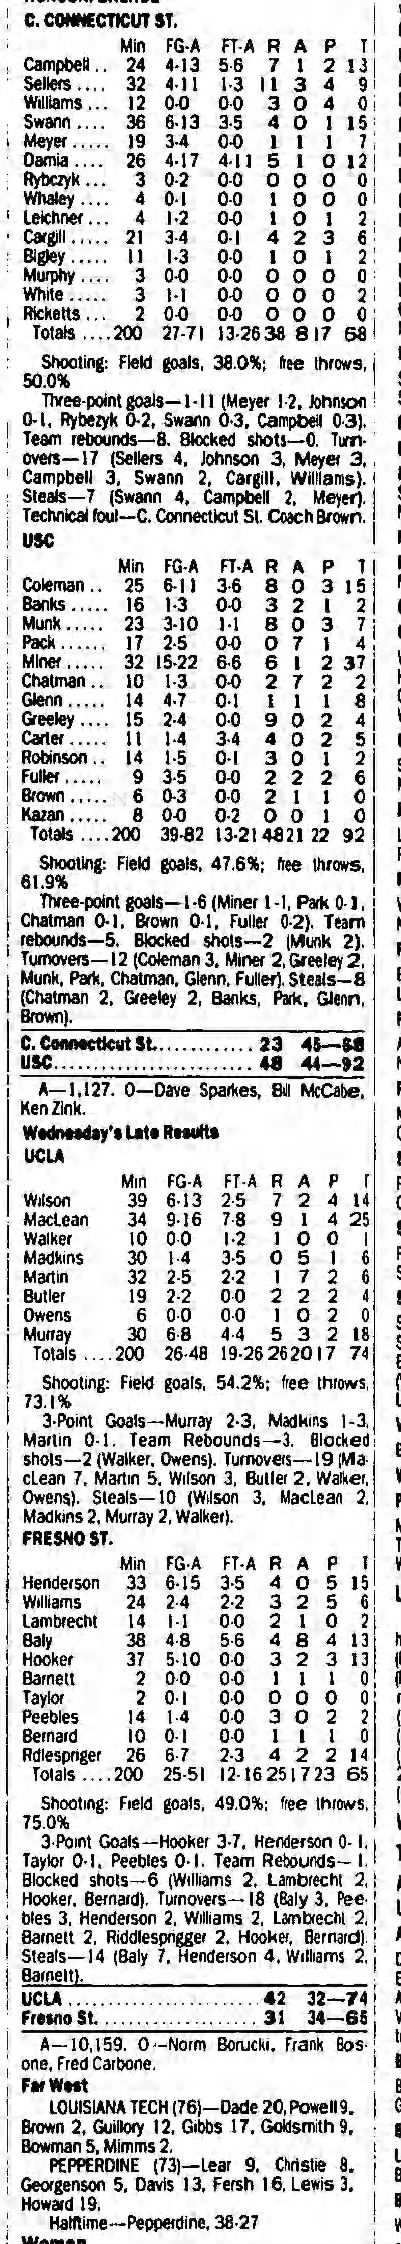 USC vs. Central Connecticut State, December 28, 1989